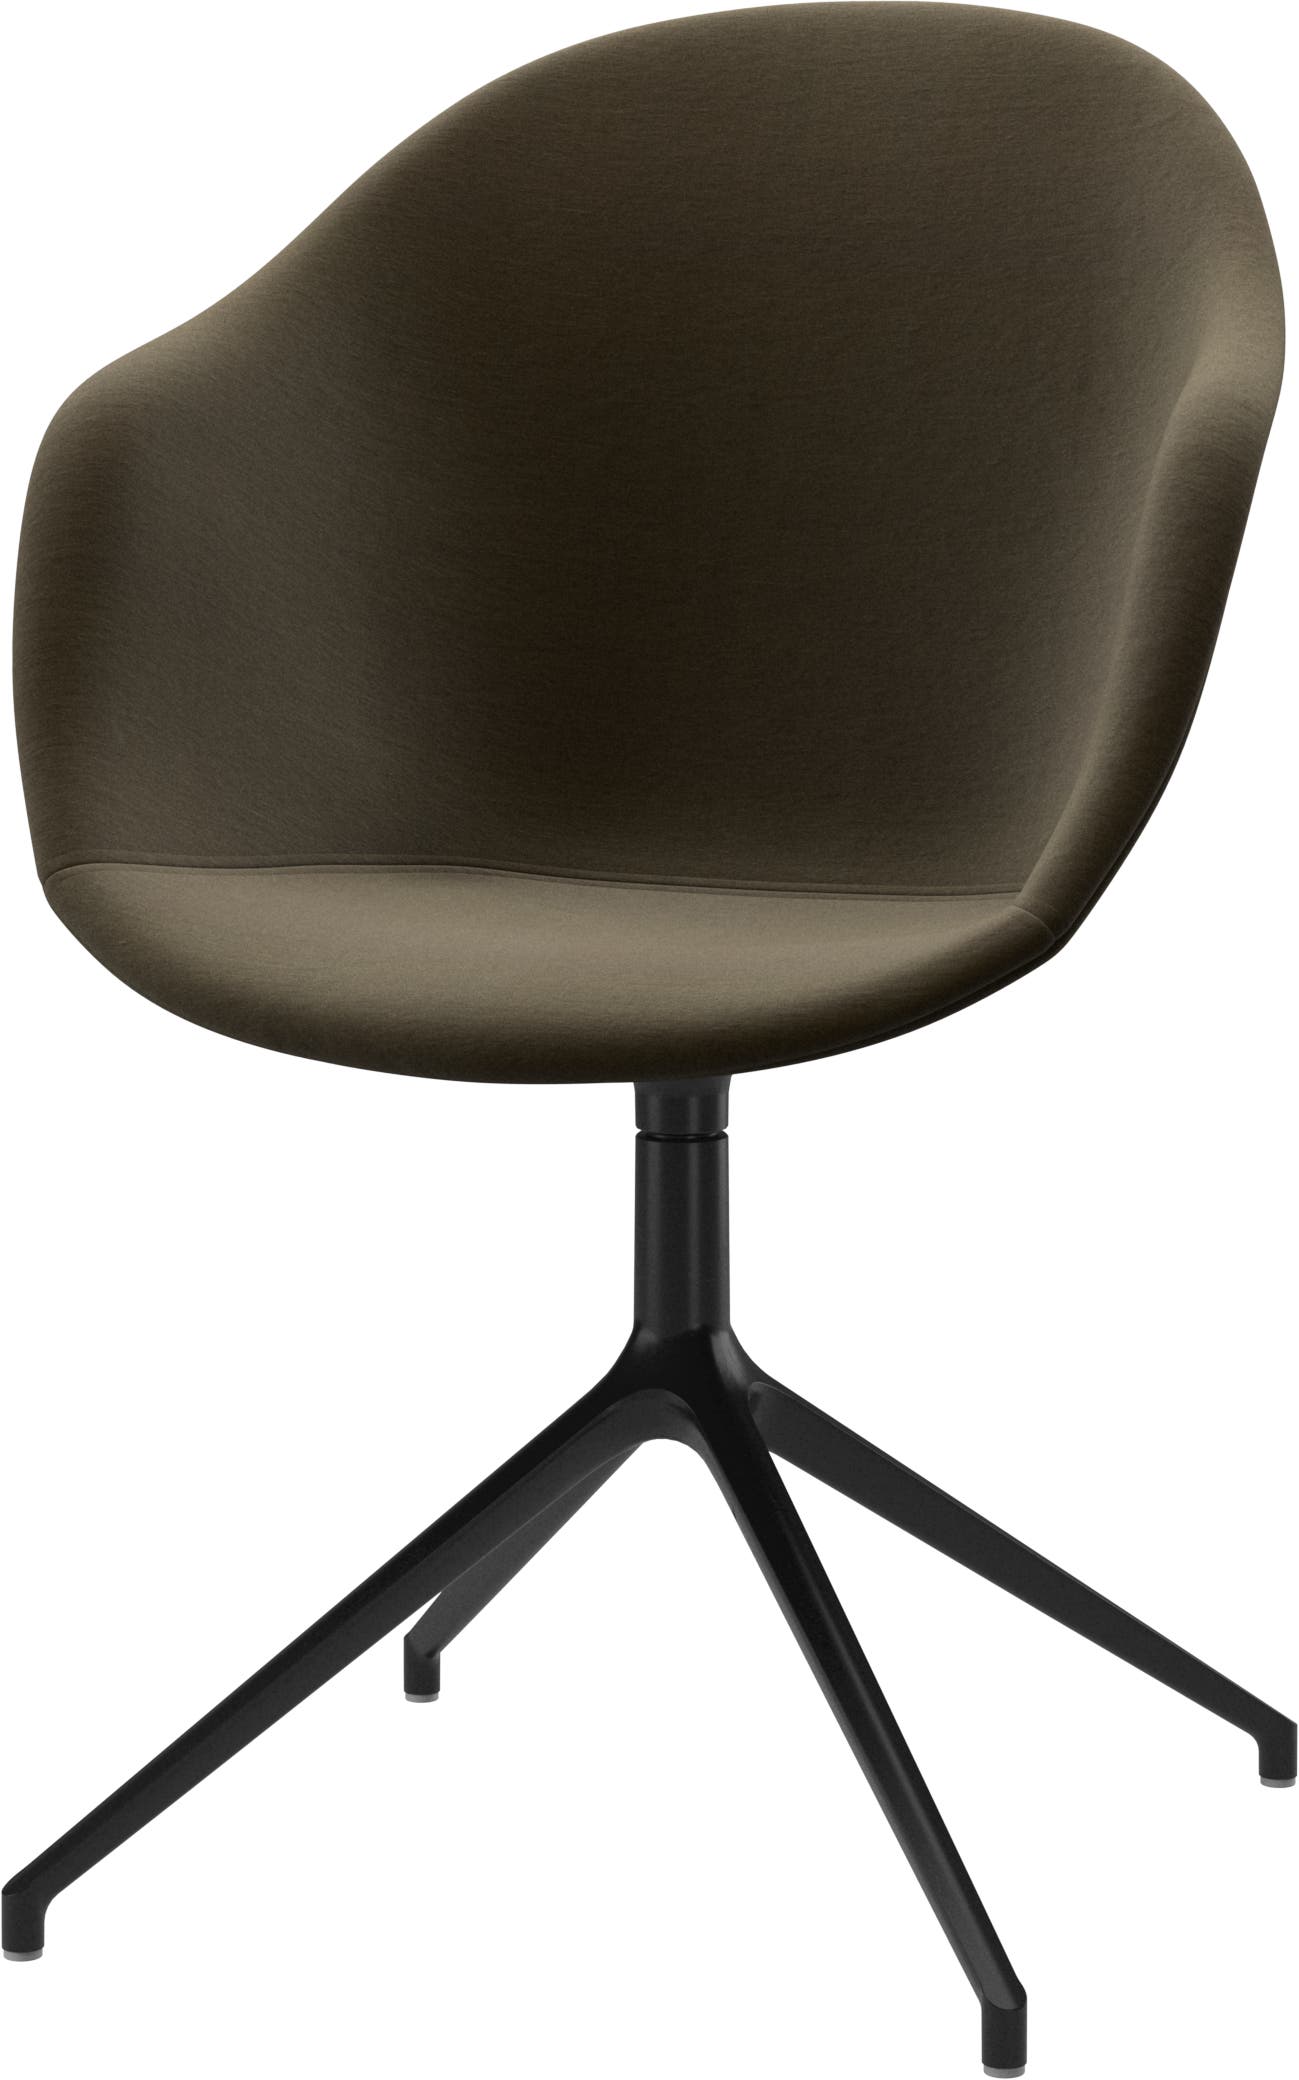 Adelaide chair with swivel function